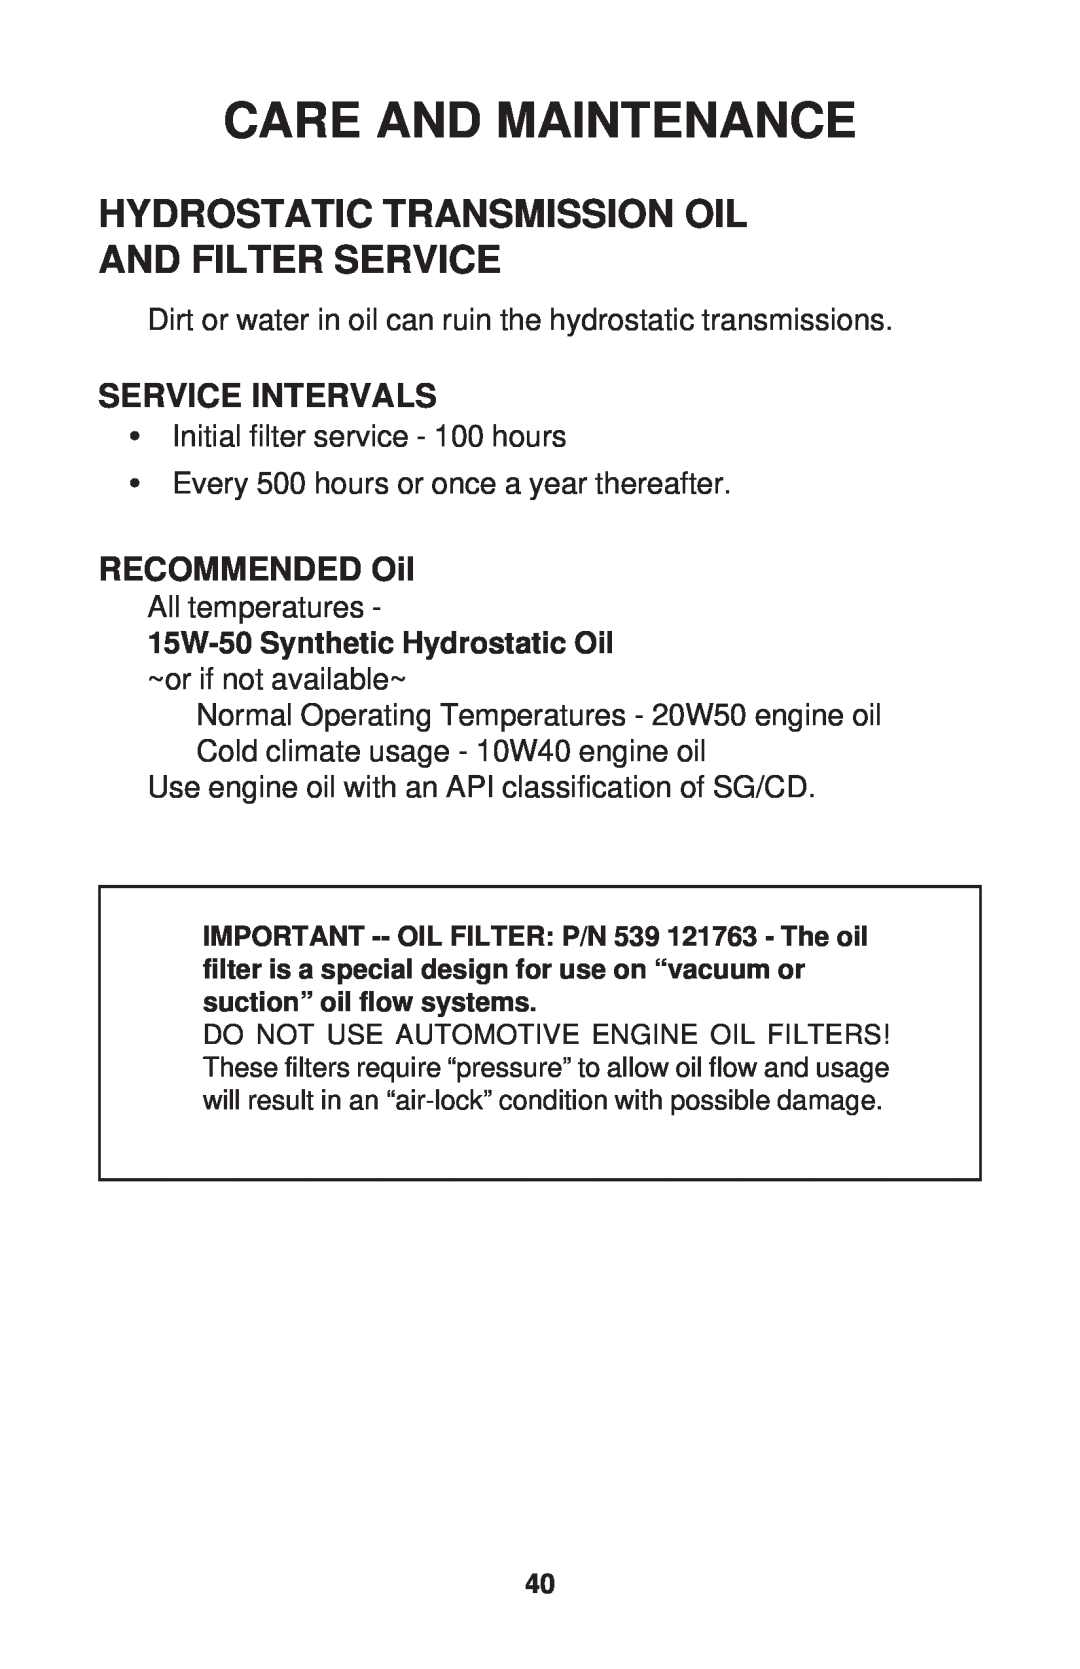 Dixon ZTR 34, ZTR 44, ZTR 34 manual Hydrostatic Transmission Oil And Filter Service, Service Intervals, RECOMMENDED Oil 